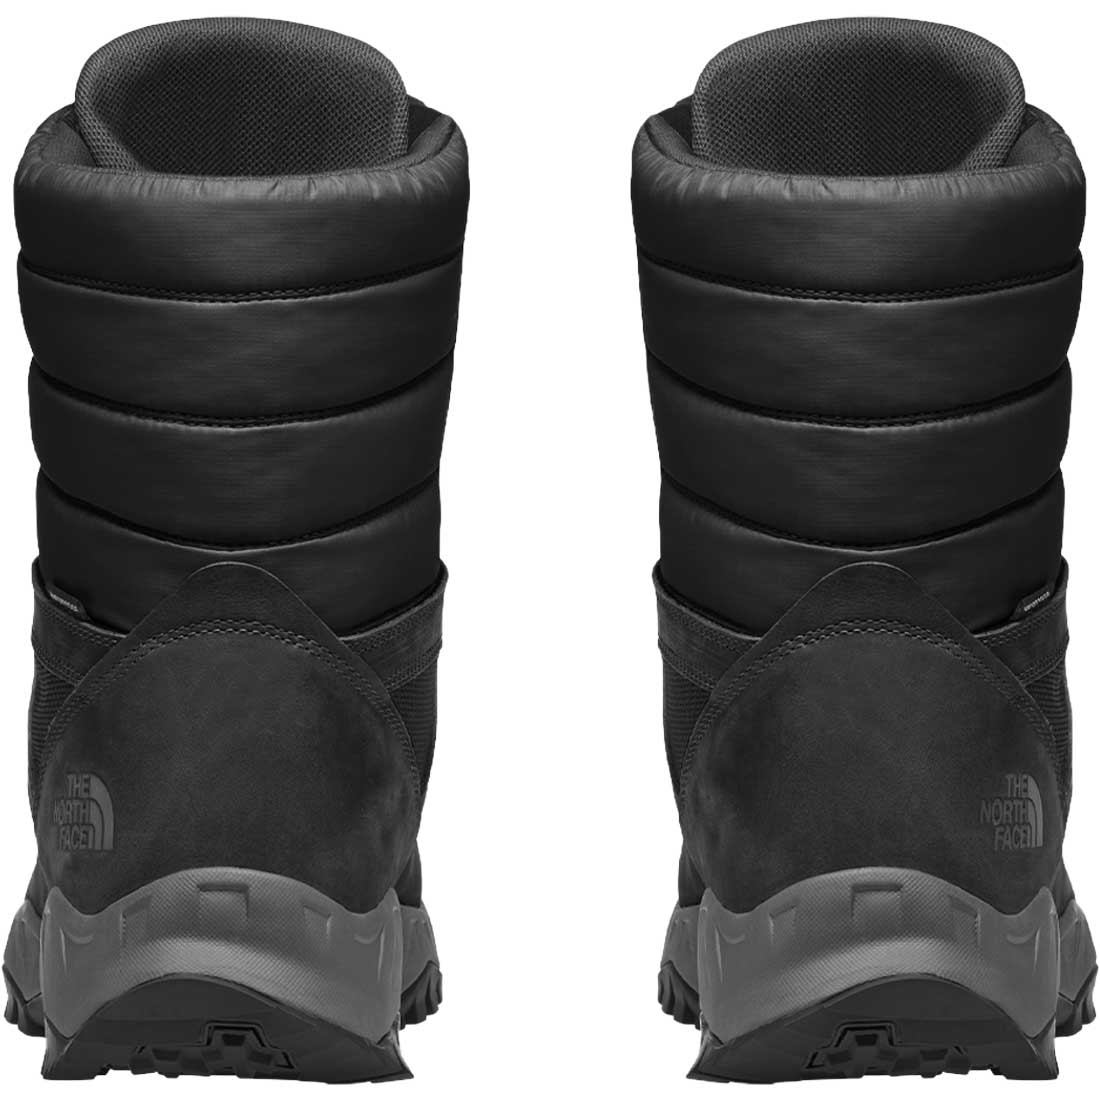 The North Face Thermoball Boot Zip-Up - Men's